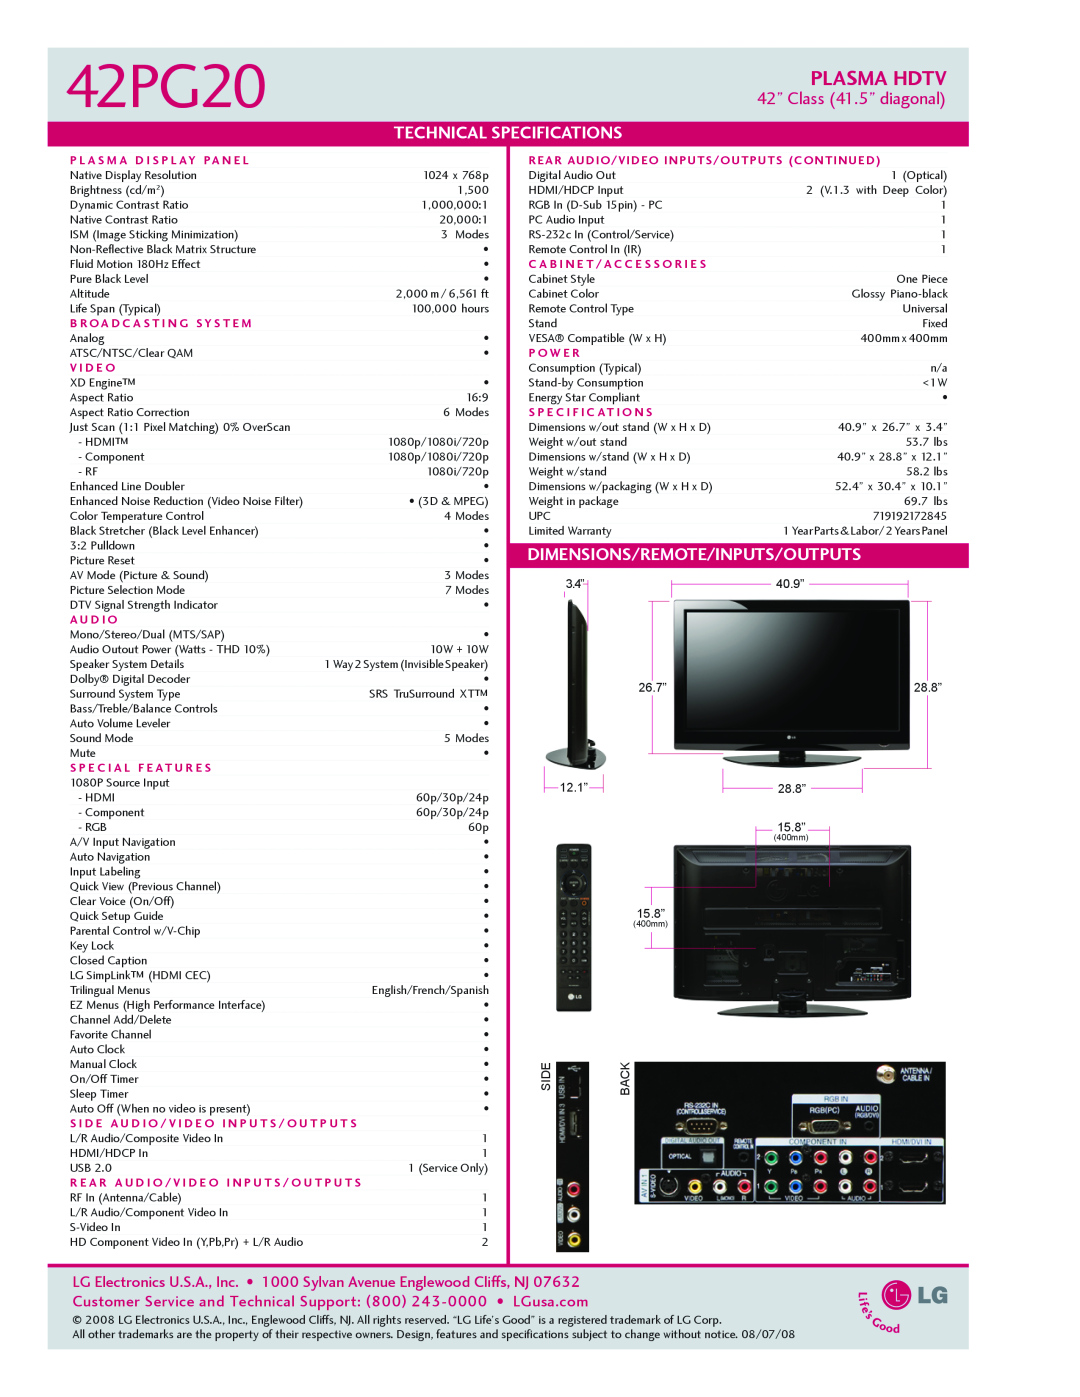 LG Electronics 42PG20 manual Plasma Hdtv, Technical, Specifications, Dimensions/Remote/Inputs/Outputs 